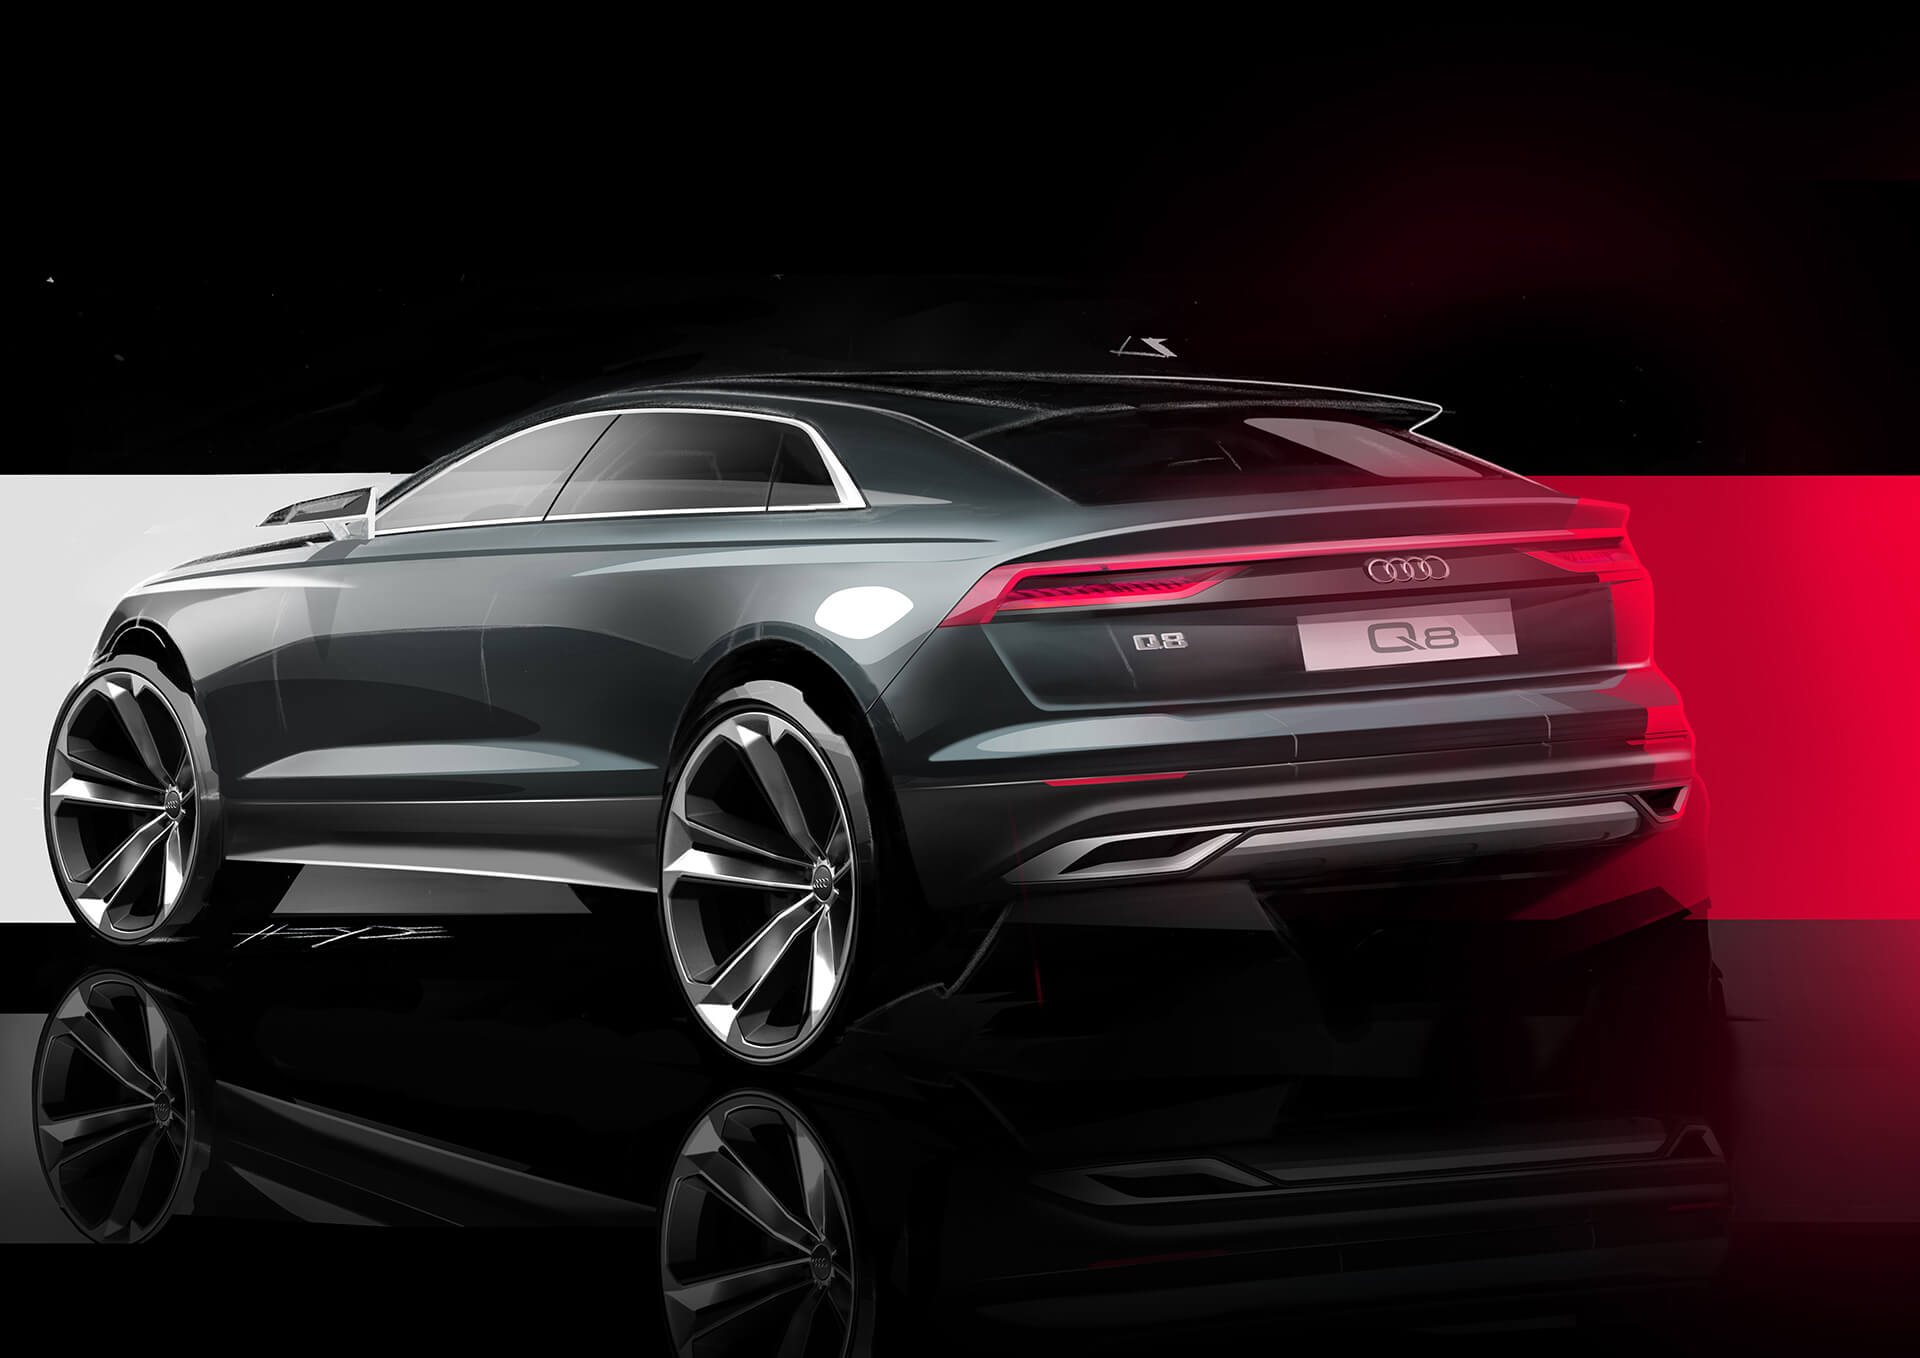 This new Audi Q8 teaser hints the luxury SUV will be no wallflower